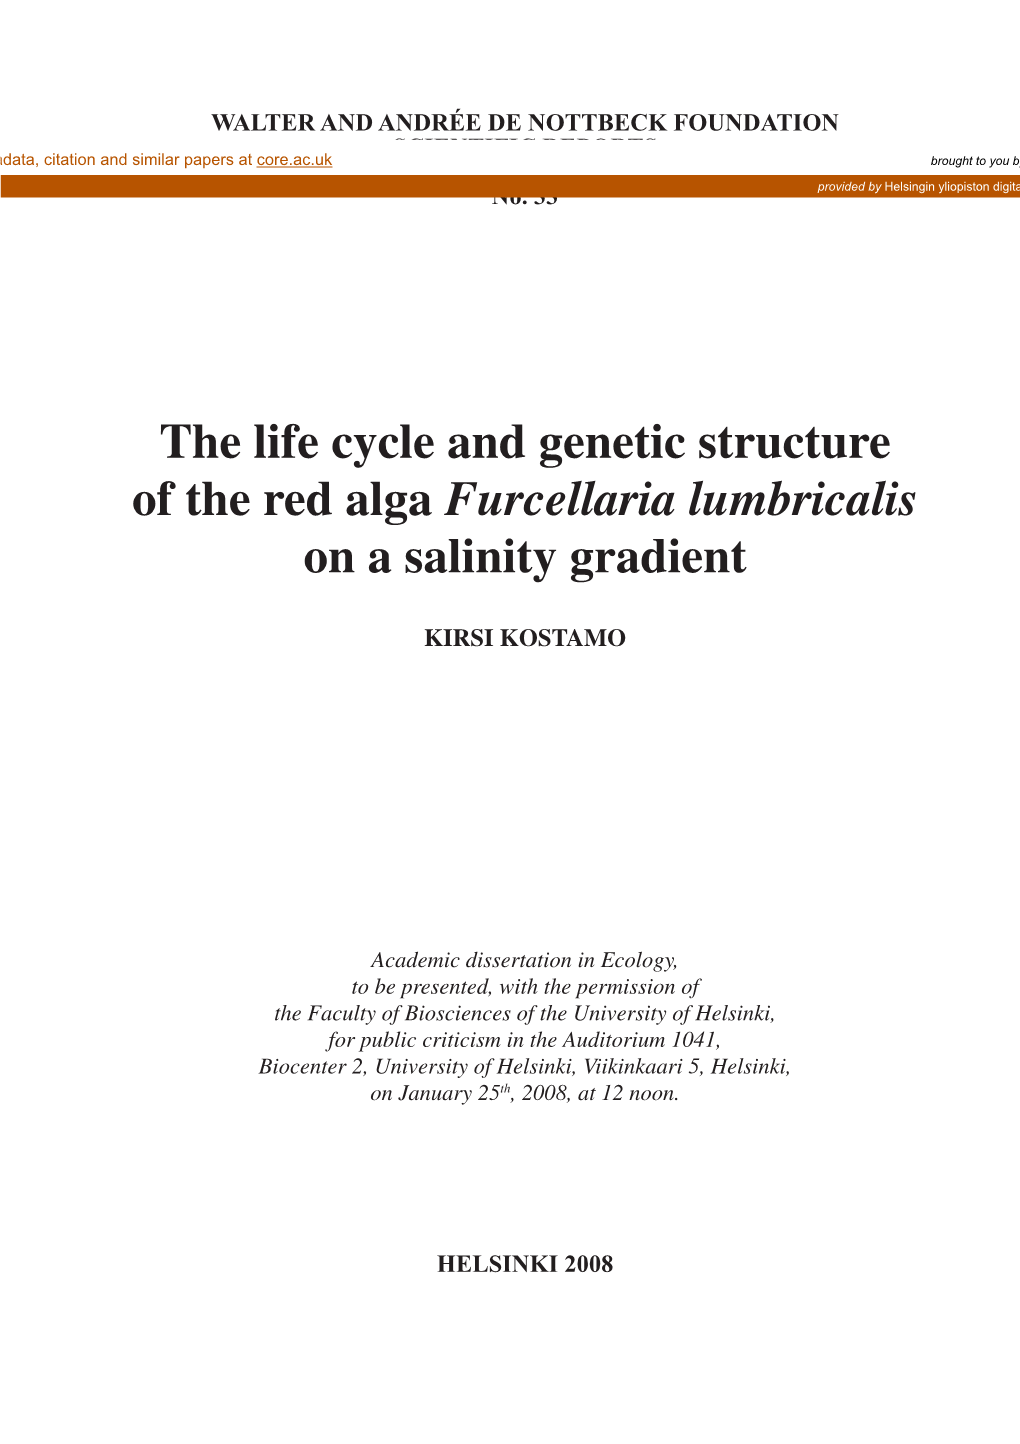 The Life Cycle and Genetic Structure of the Red Alga Furcellaria Lumbricalis on a Salinity Gradient